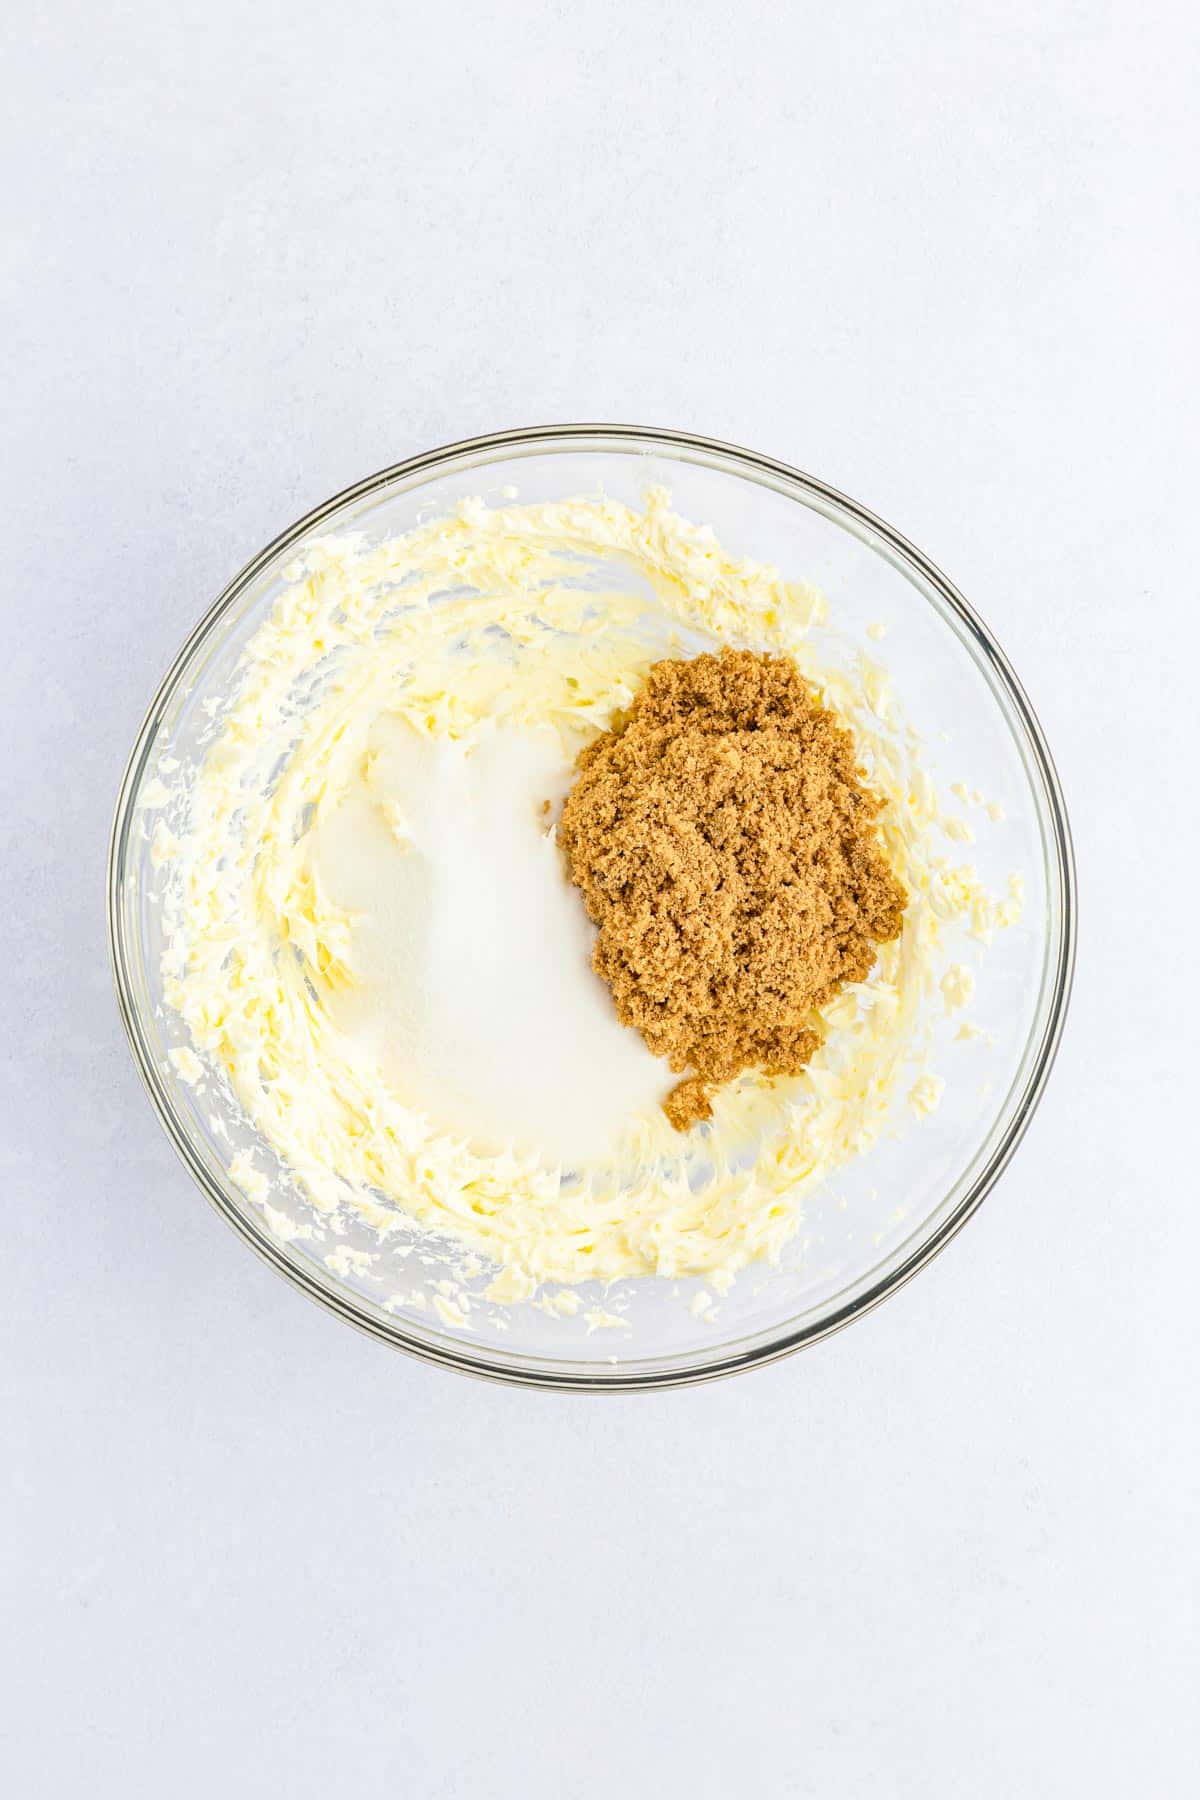 Butter and sugars creamed together in a bowl.